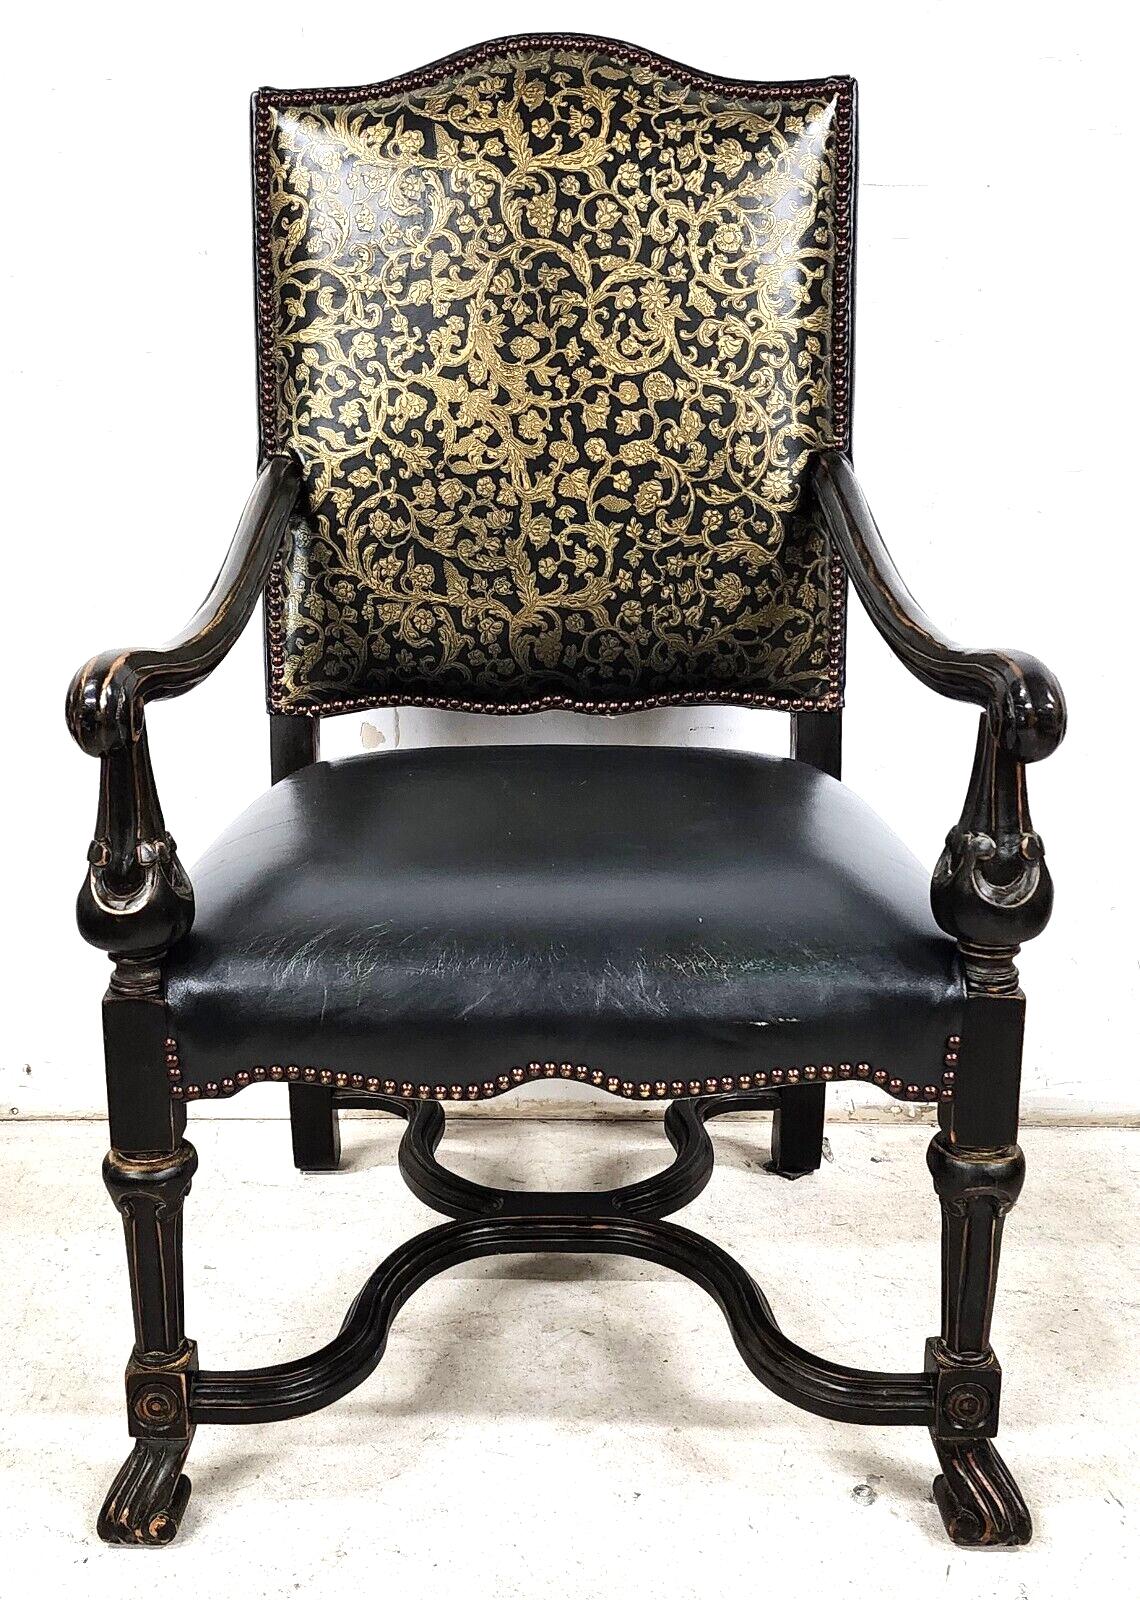 For FULL item description click on CONTINUE READING at the bottom of this page.

Offering One Of Our Recent Palm Beach Estate Fine Furniture Acquisitions Of An 
Antique Hand Colored Embossed Leather Throne Armchair 1800's 
Inside back is